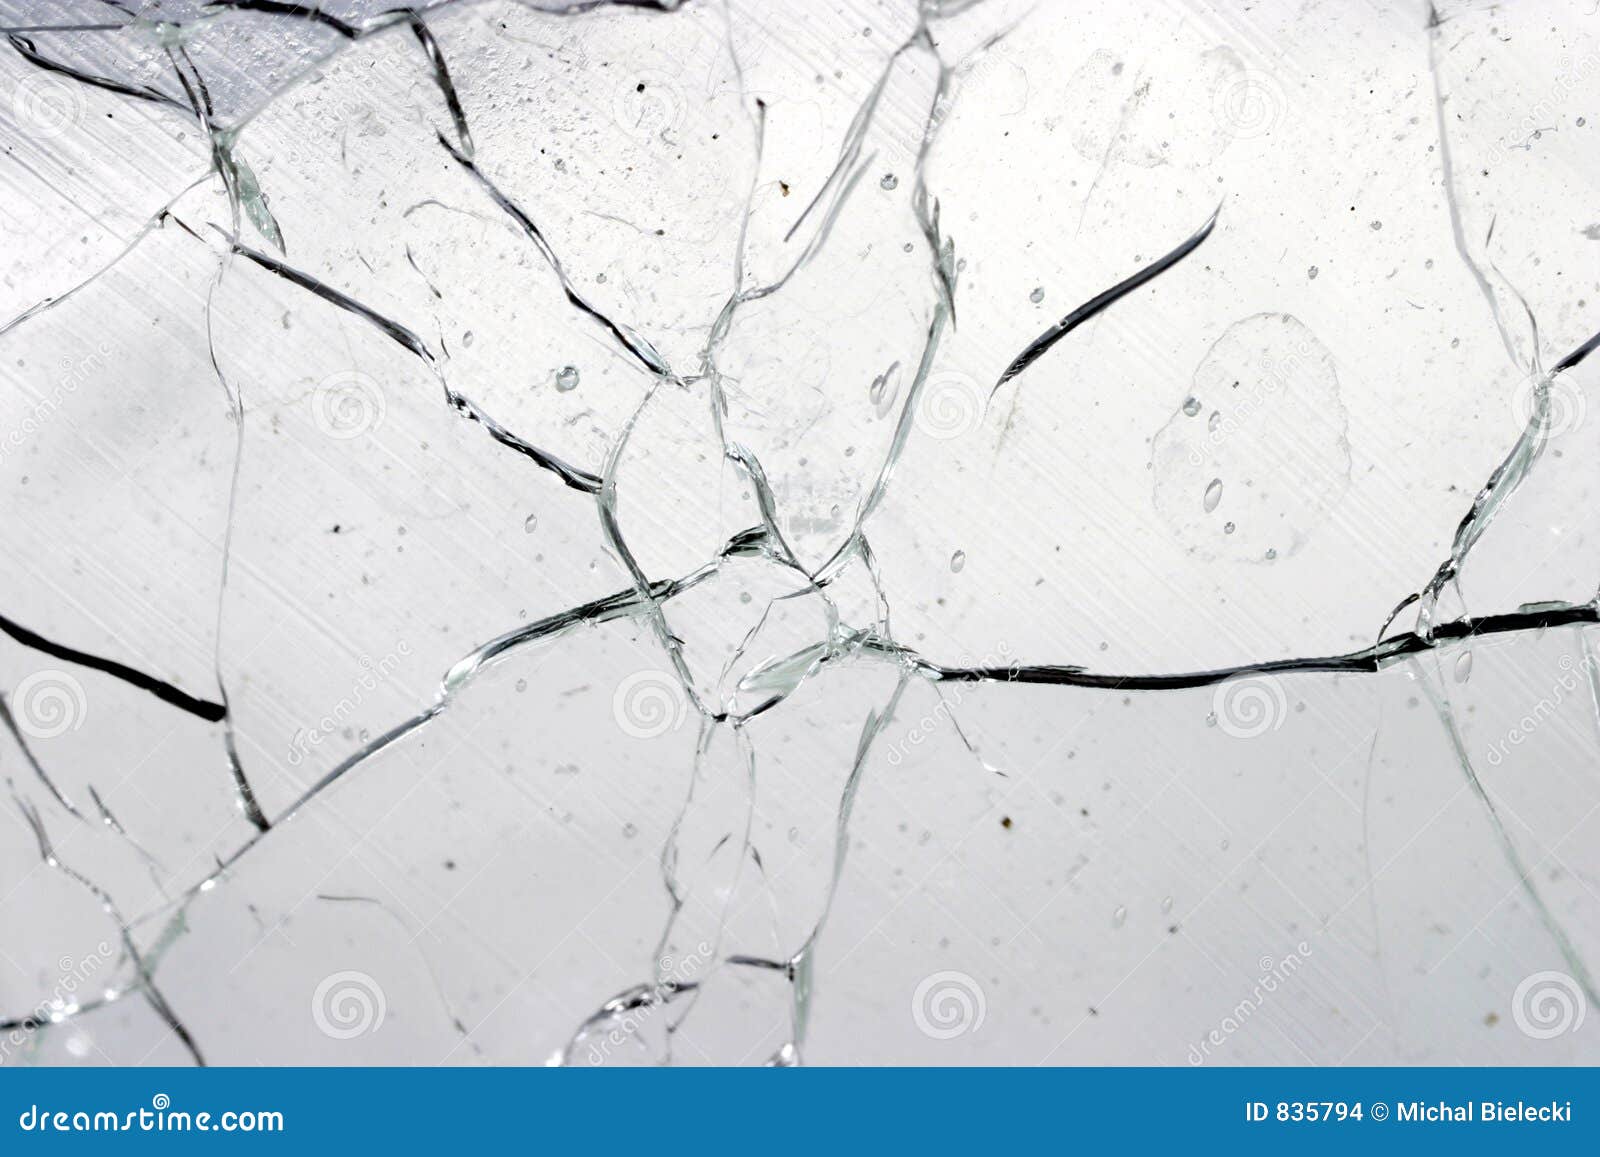 free clip art cracked glass - photo #38